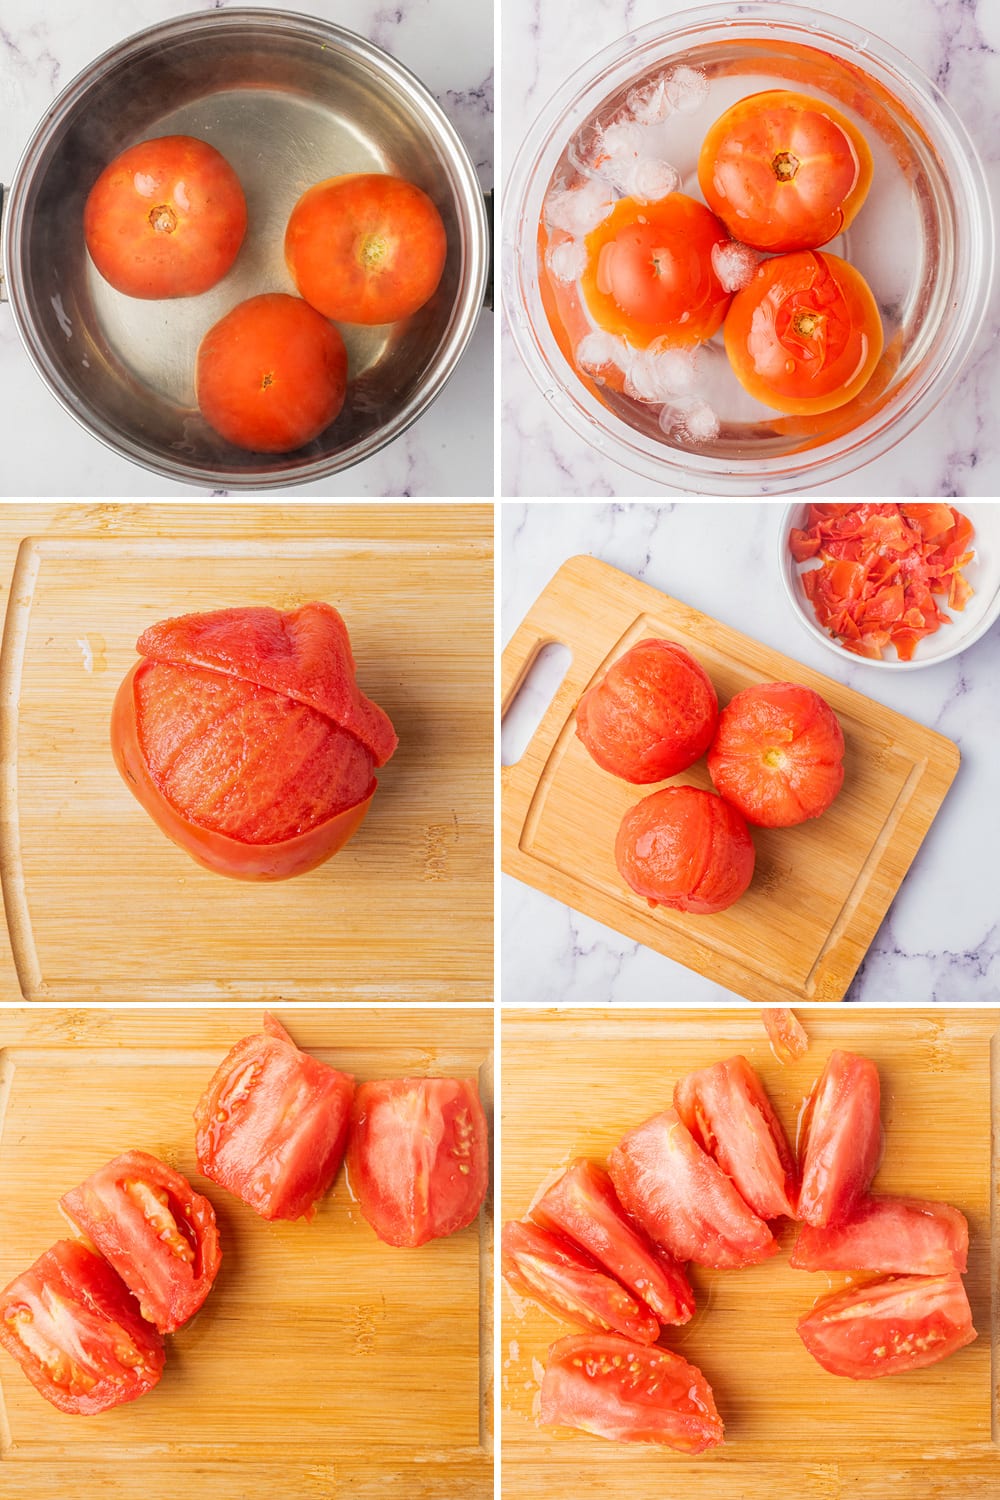 how to prepare tomatoes for stewing - blanch, ice, peel